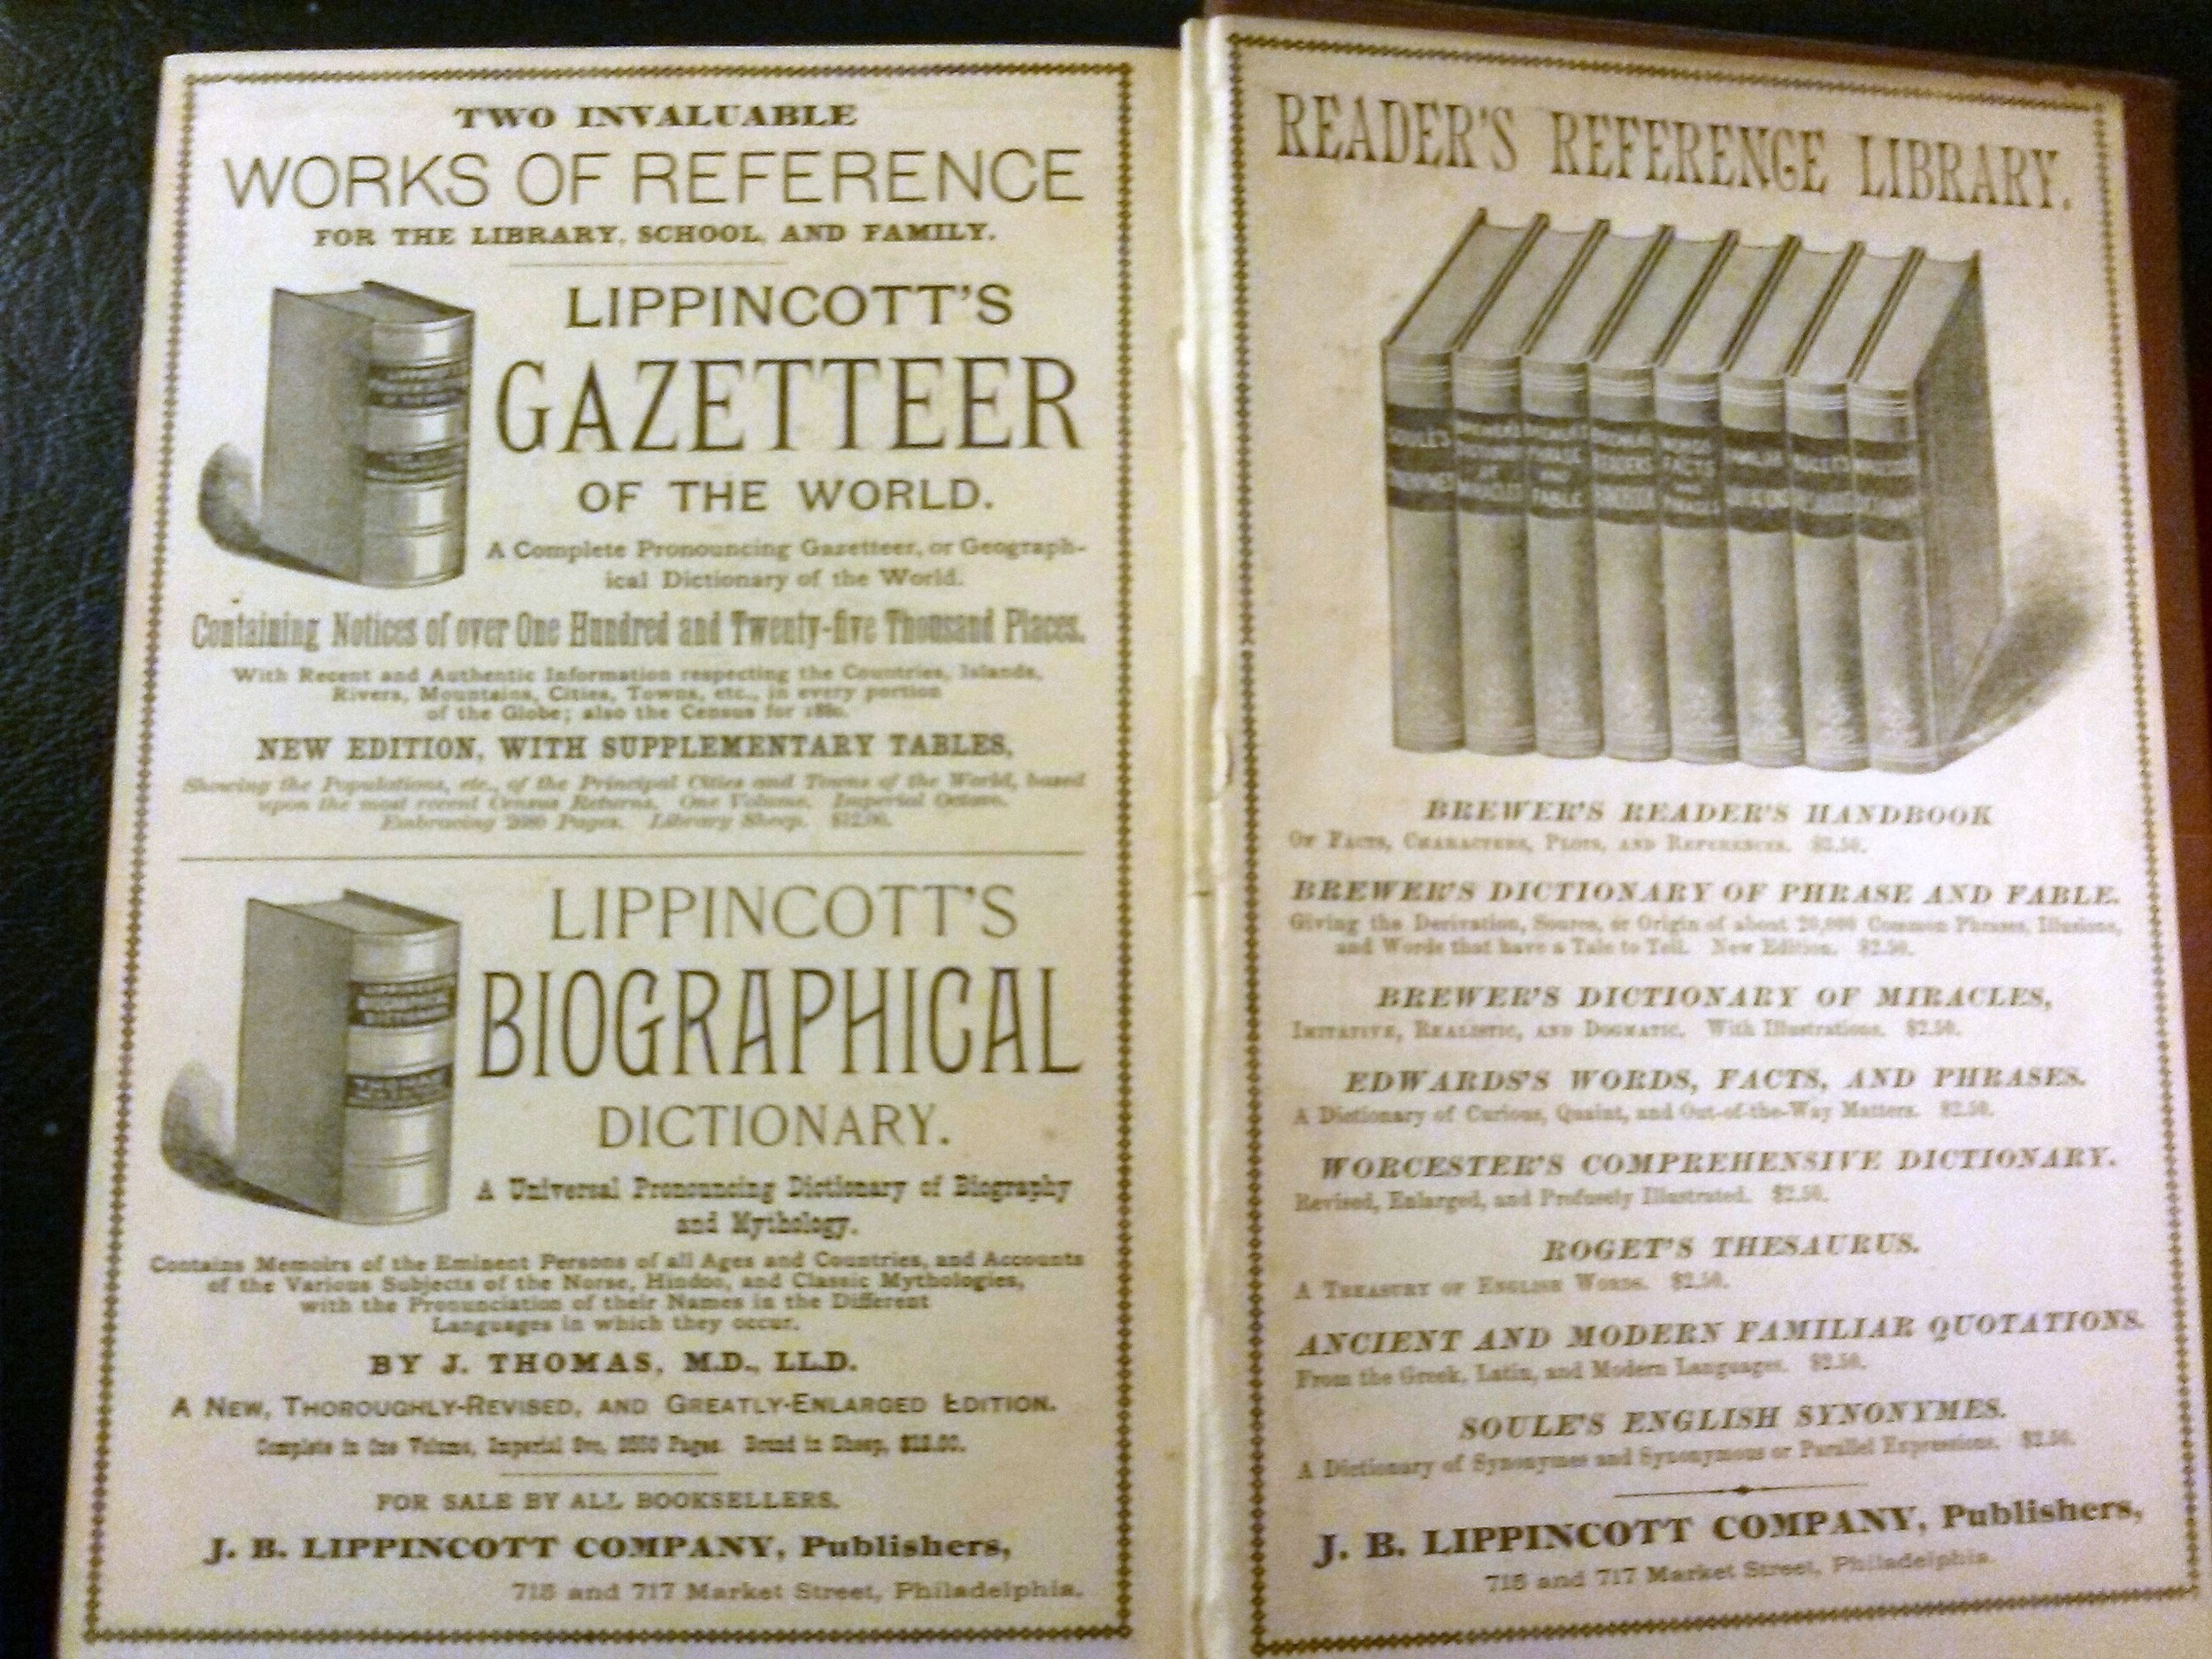 P&G Endpages 1887.jpg